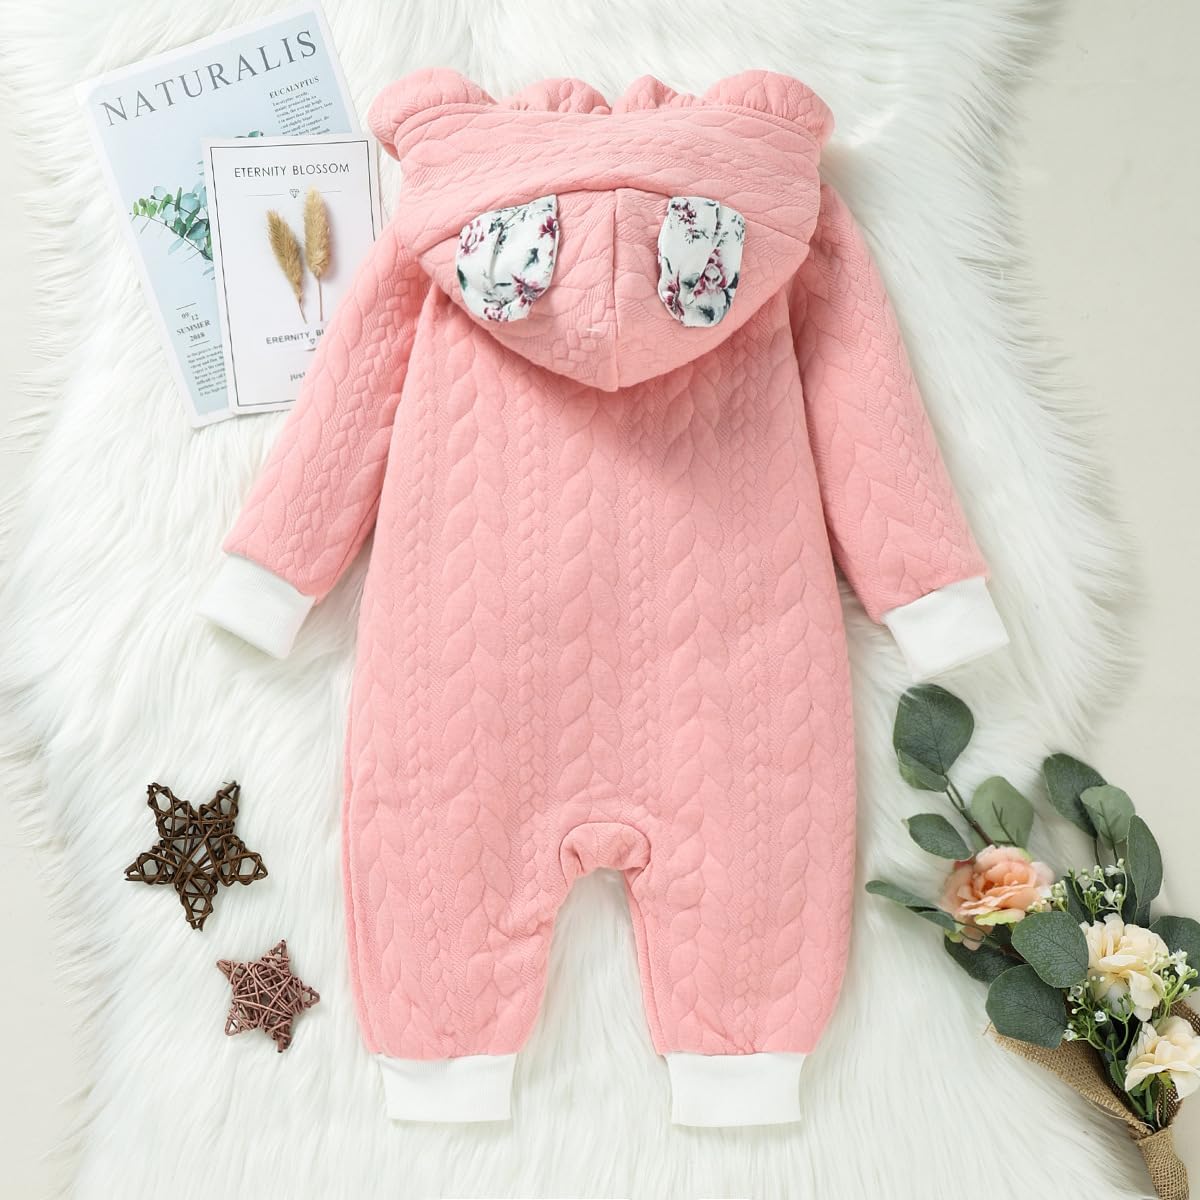 Yoolhamy Baby Romper One-Pieces Jumpsuit Warm Hoodie Fall Winter Clothes for Newborn Girs Christmas Outfit 6-9 Months Bodysuit